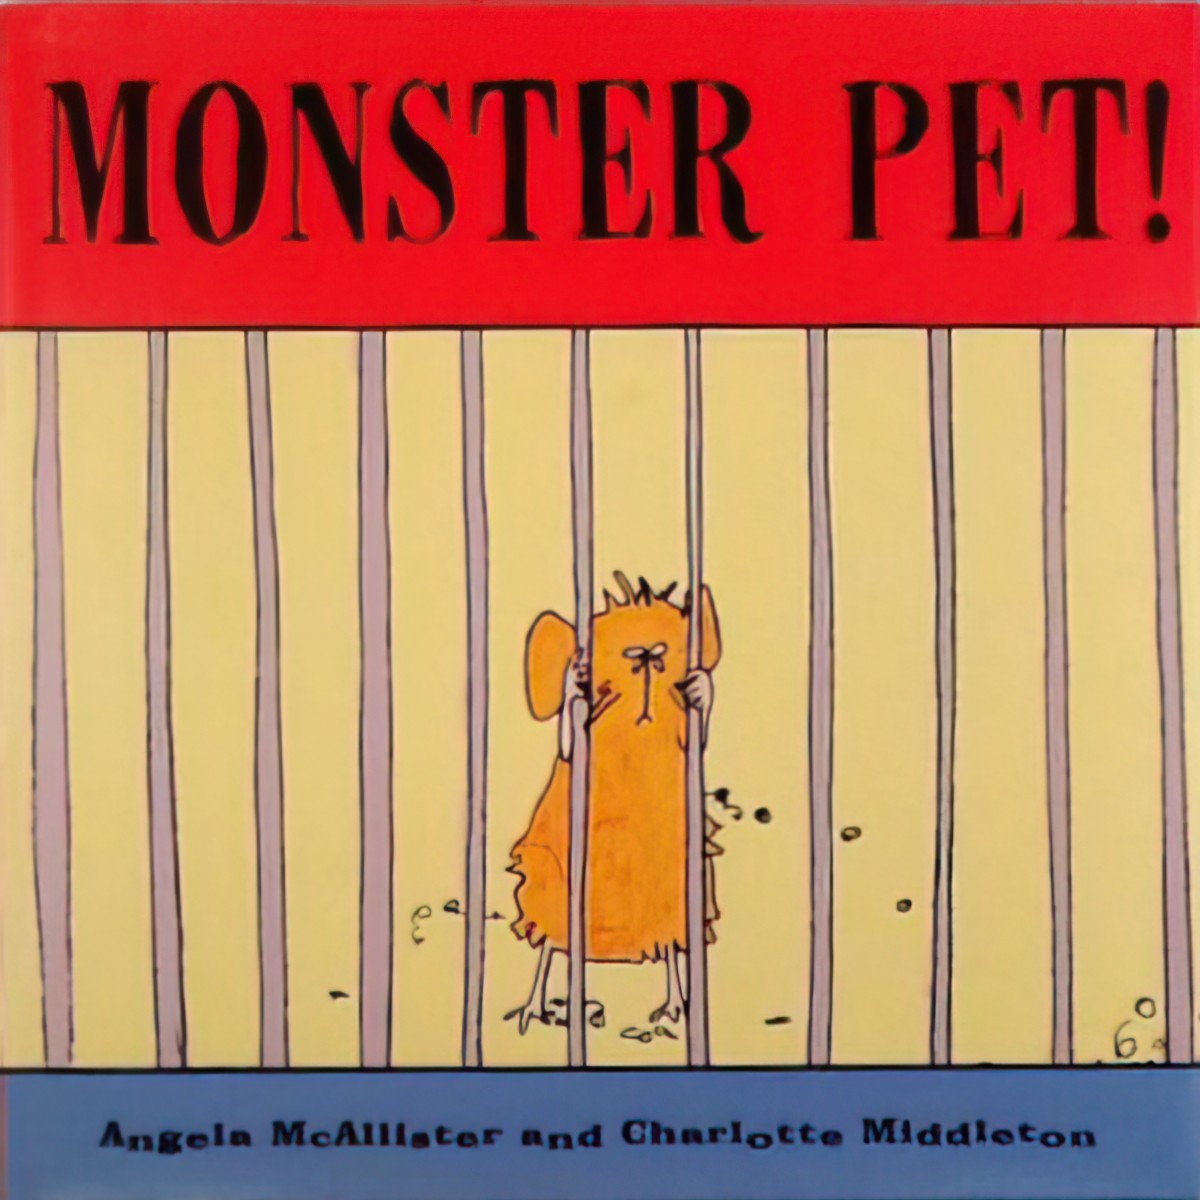 Monster Pet! by McAllister and Middleton Analysis